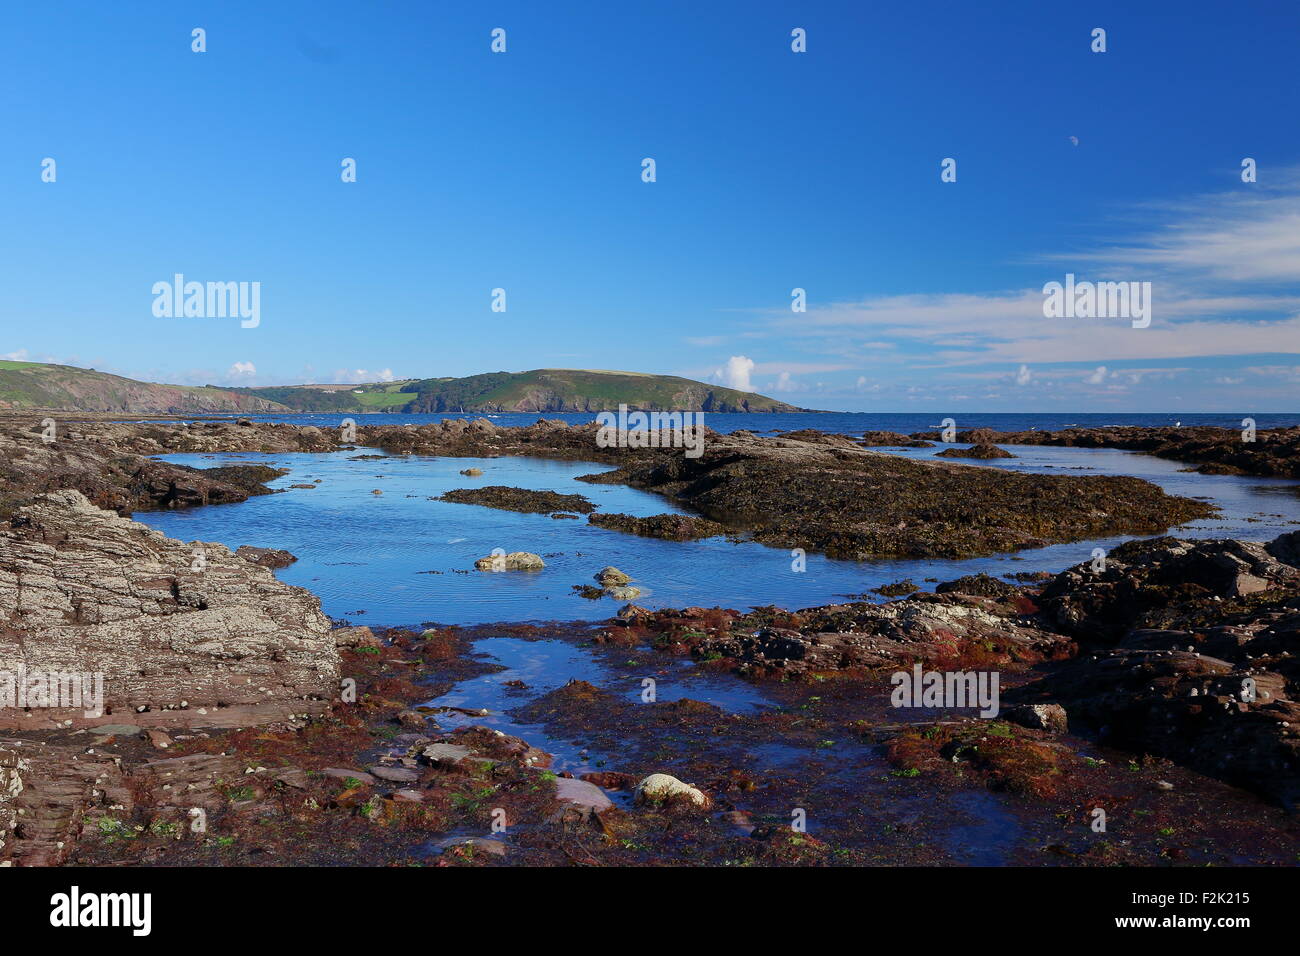 Calm Rockpool on a bright sunny day at National Trust Wembury Beach, Devonshire Coast, South West England Stock Photo